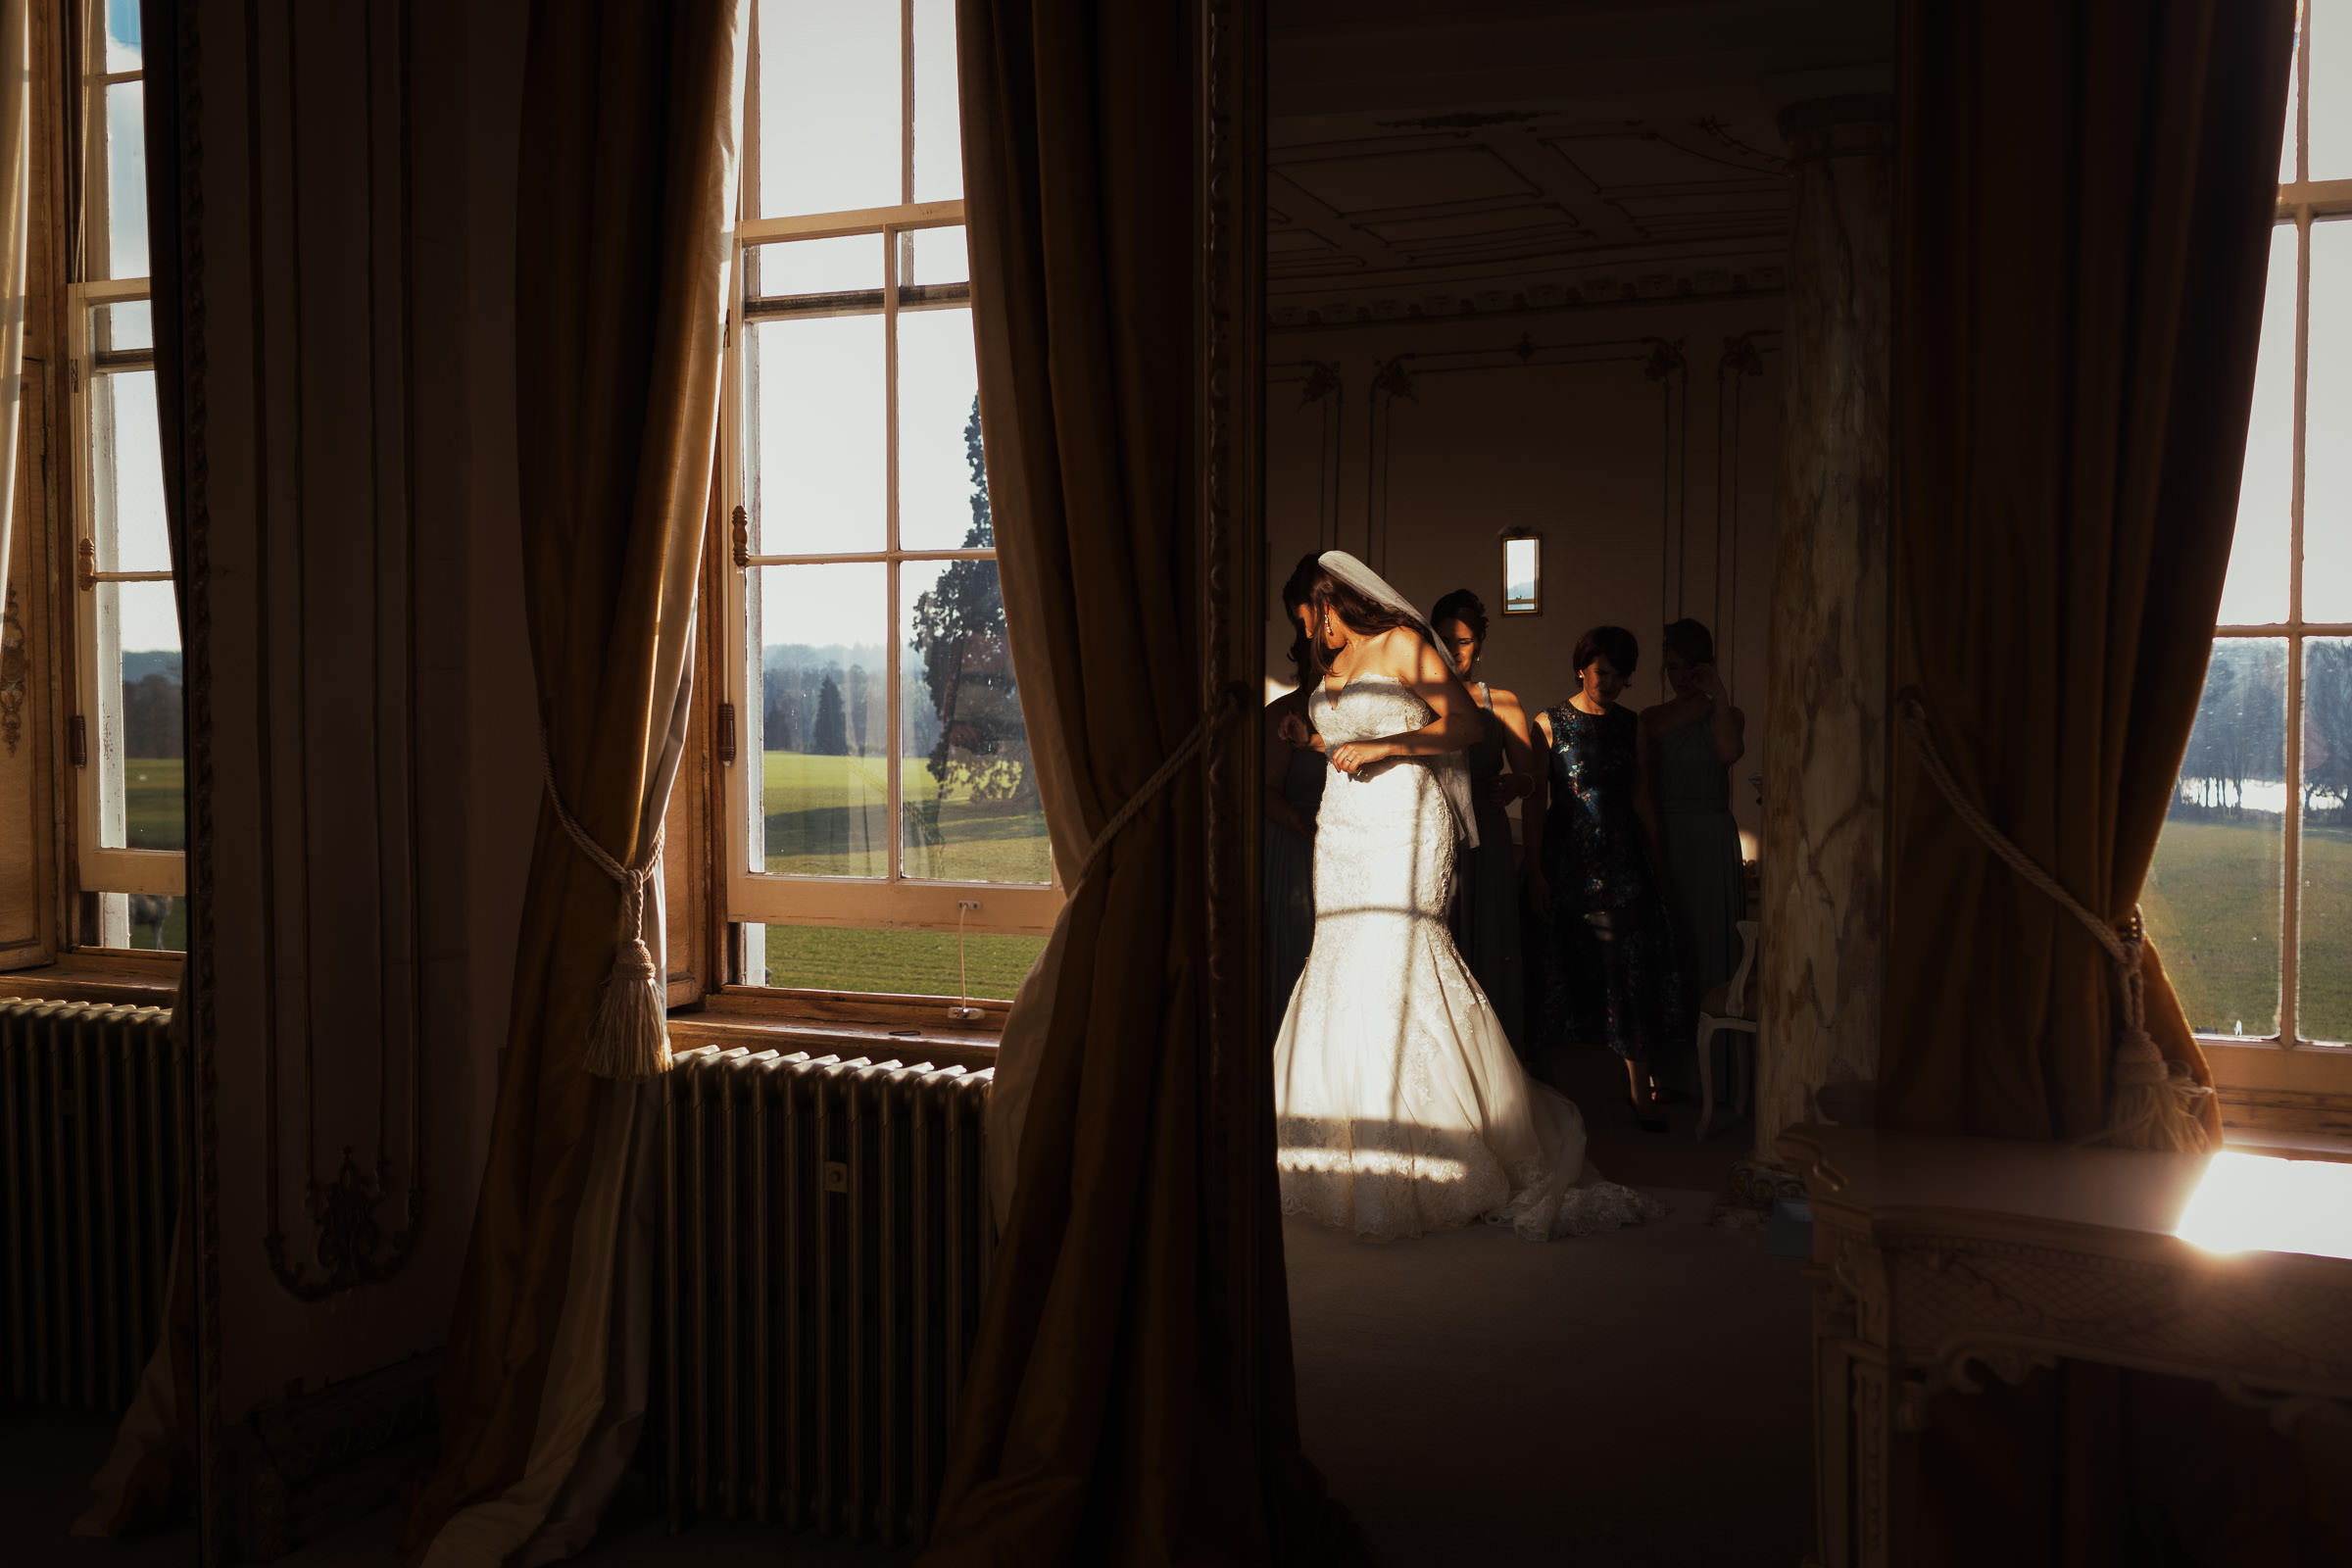 In the Rococo suite at Gosfield Hall. A reflection in a mirror of a bride in a fishtail wedding dress. Style 2713 by Mori Lee Madeline Gardner. The shadow of the window frame lands on her dress. Outside the windows you can see grass and trees. It's a sunny winter day.